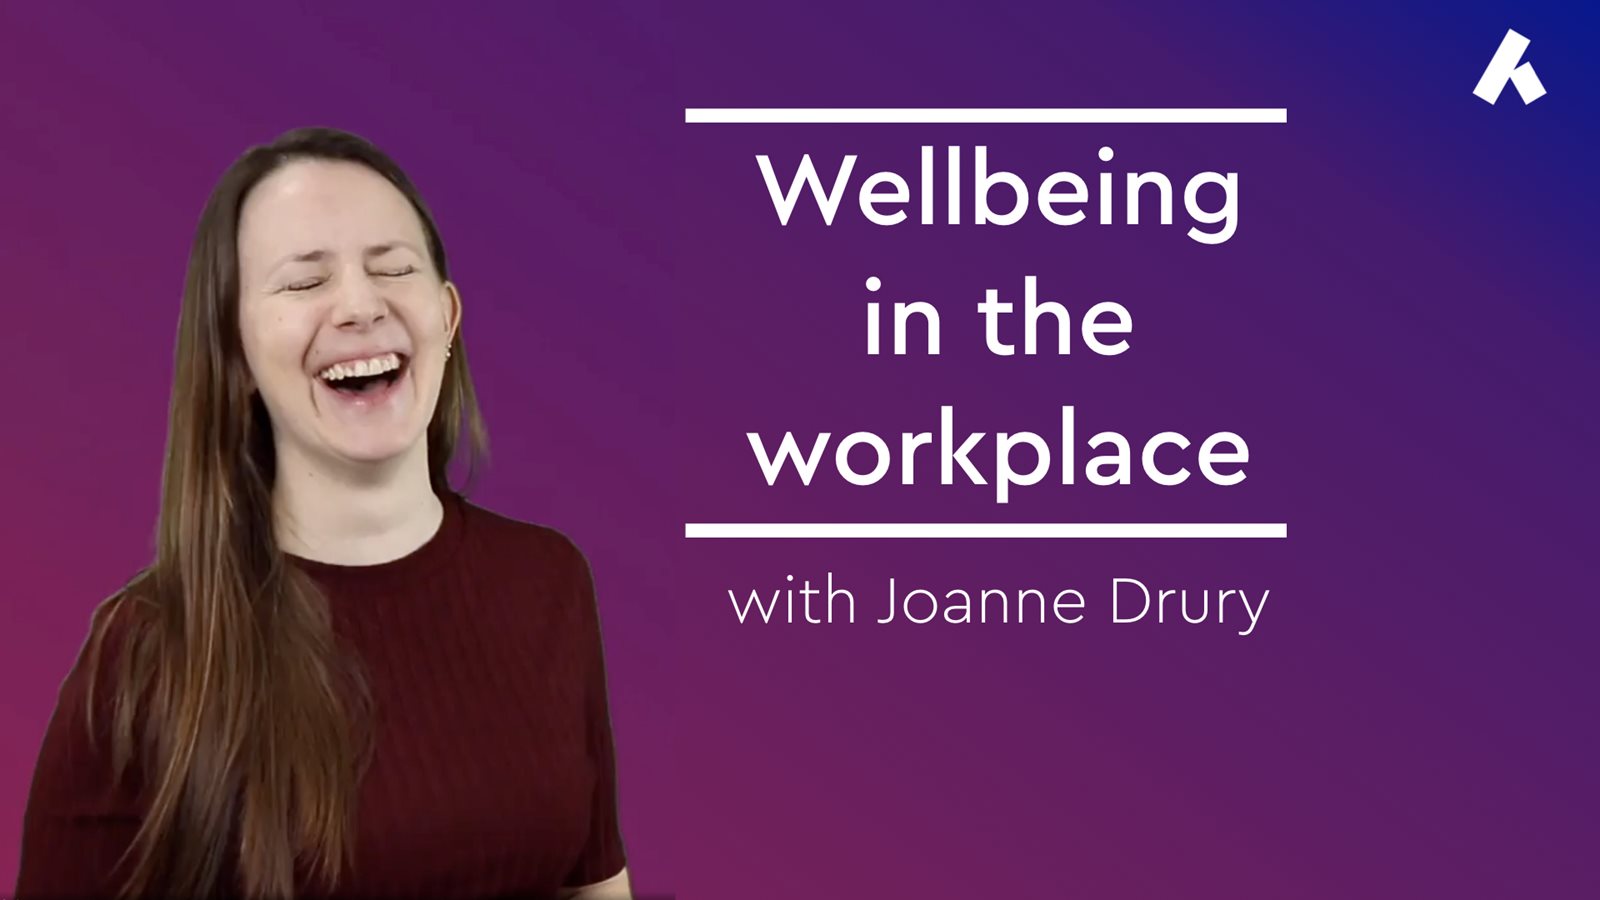 INNOVATION: Wellbeing in the workplace